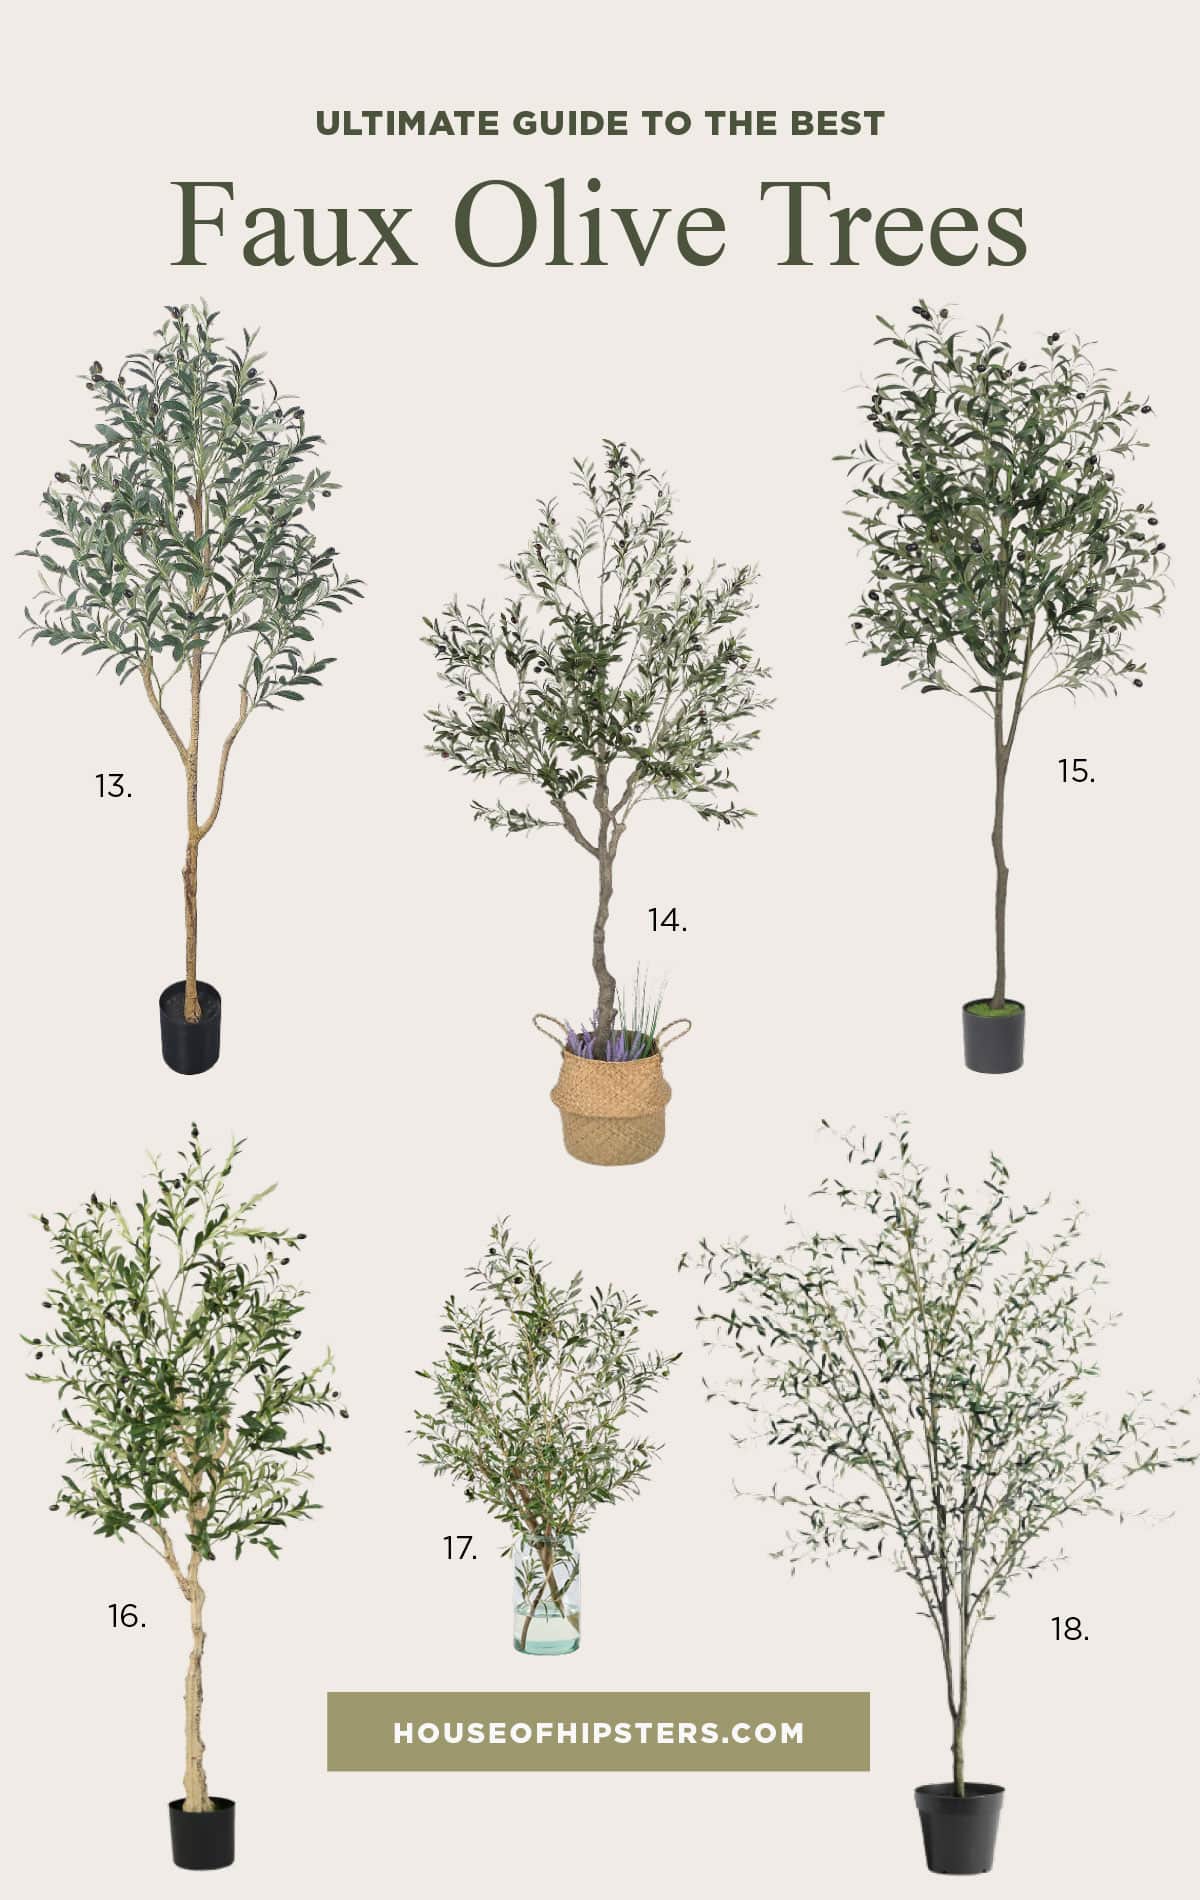 Guide To The Best Faux Olive Trees 2024 - Find the best artificial olive trees in this complete shopping guide. All of these fake olive trees have been chosen for your home decor by an expert interior designer.